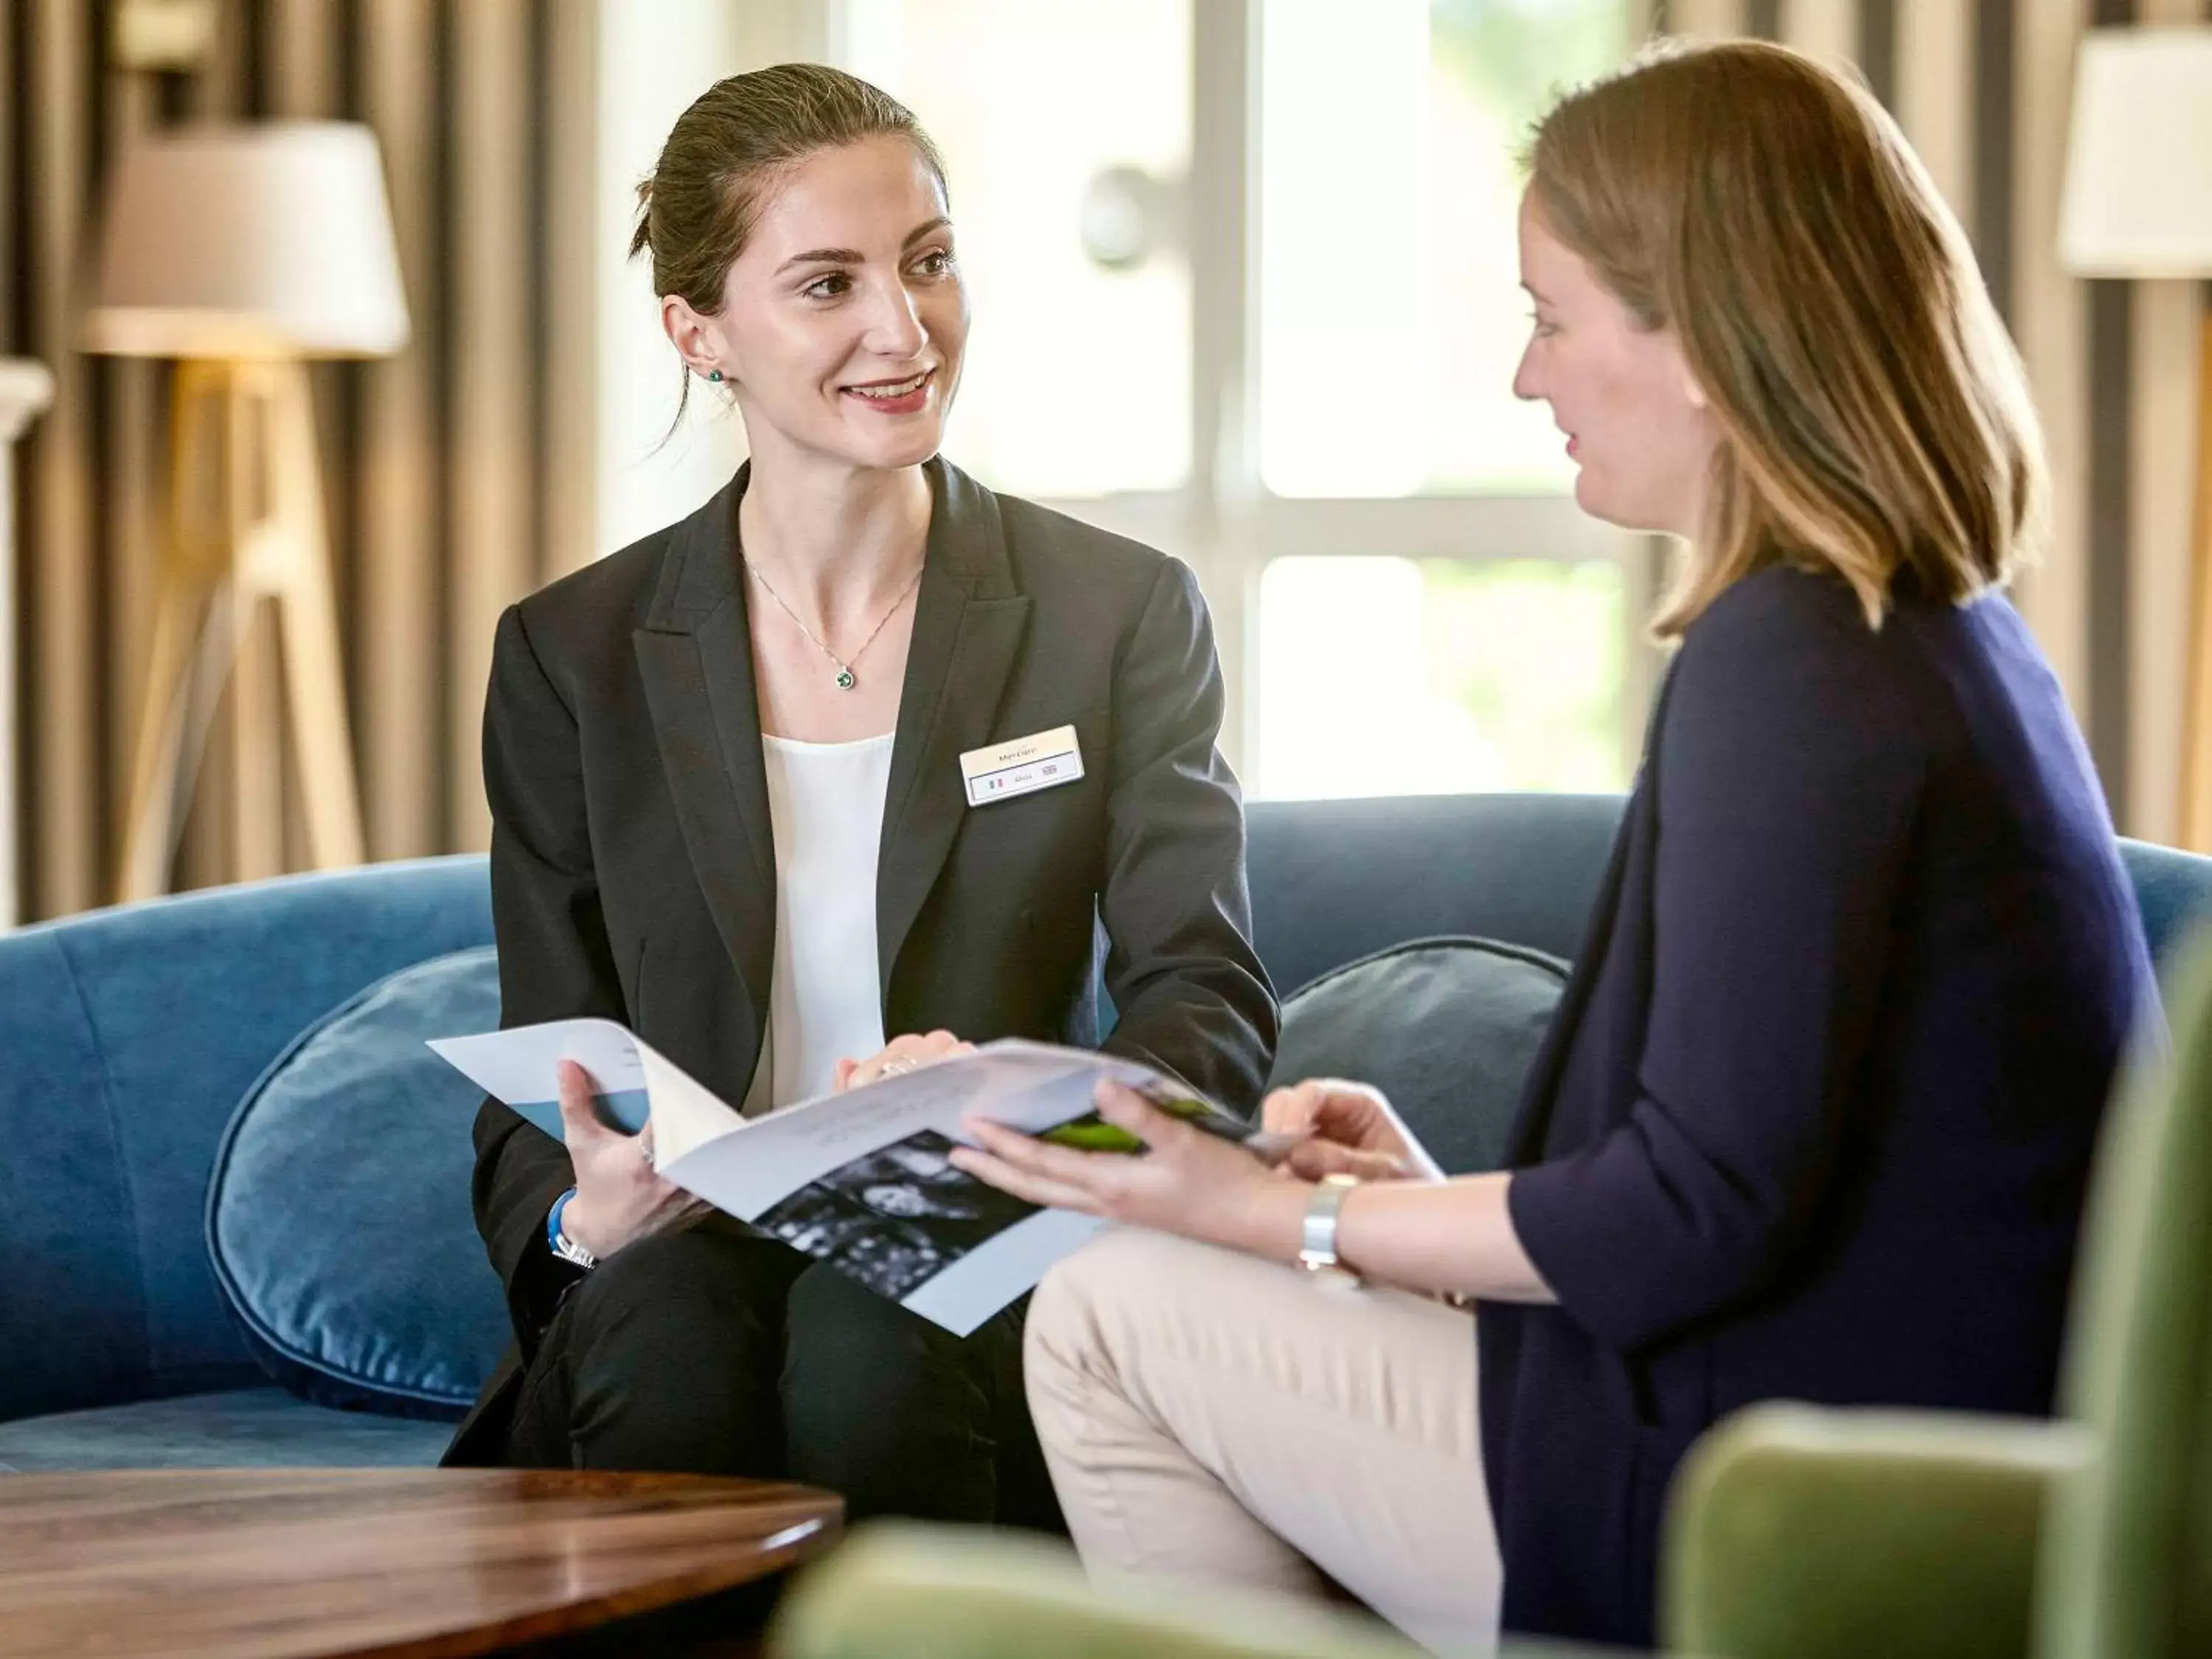 Business facilities in Mercure Chantilly Resort & Conventions